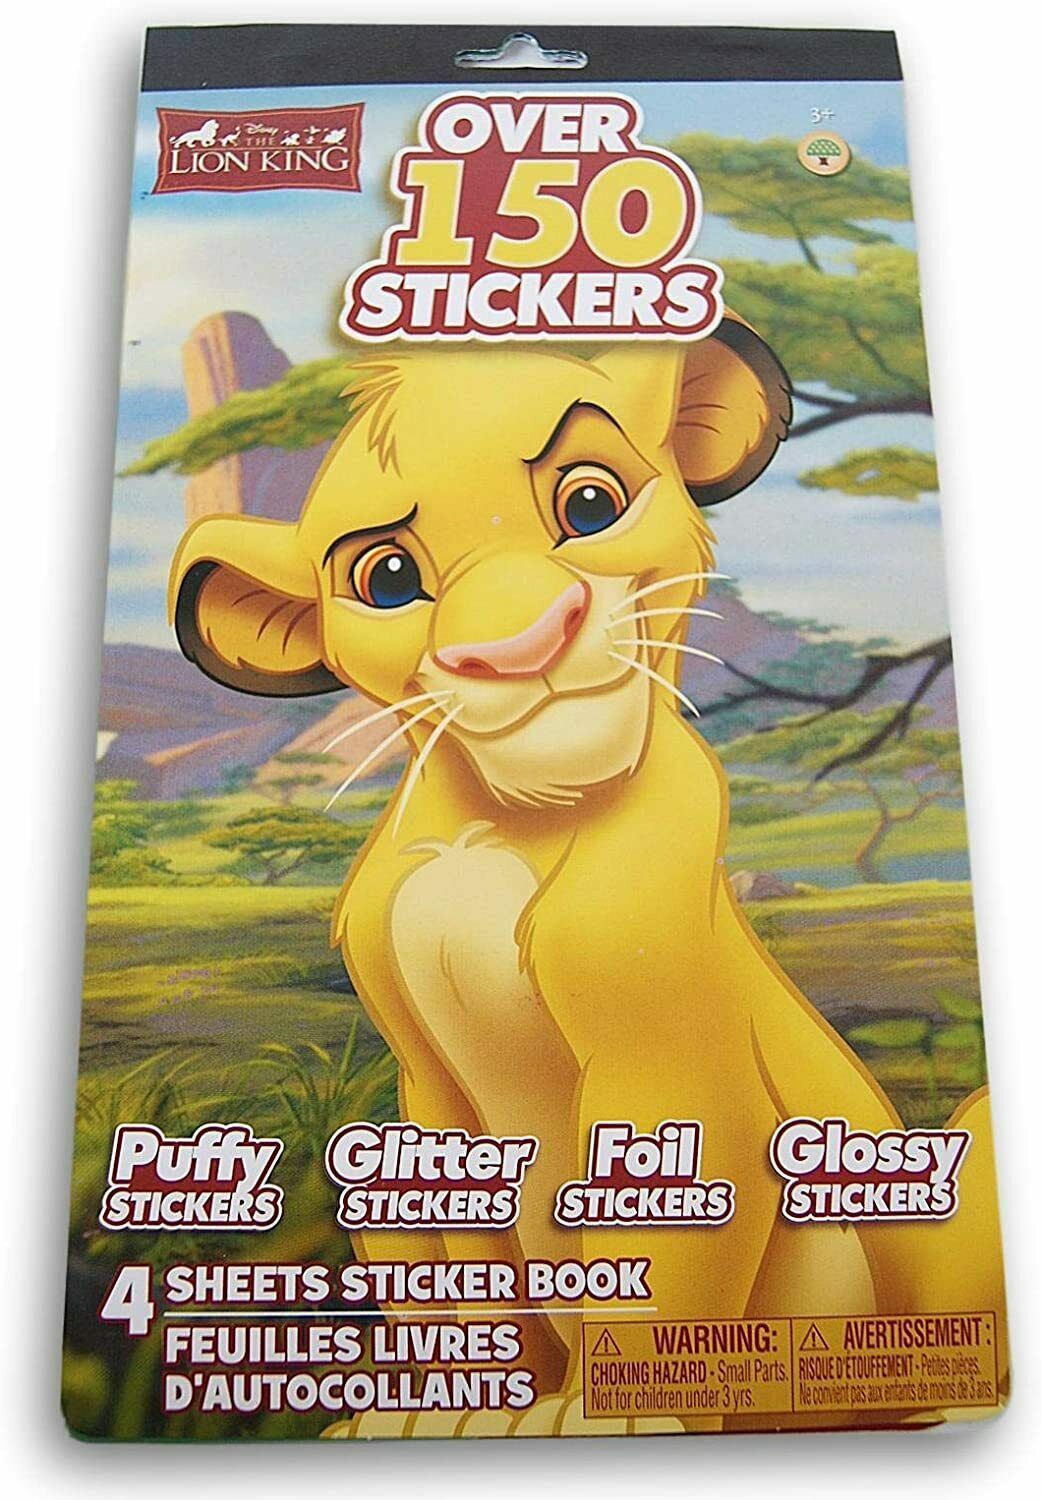 Primary image for The Lion King Simba Sticker Pad - 6 x 9.5 Inches - Over 150 Stickers